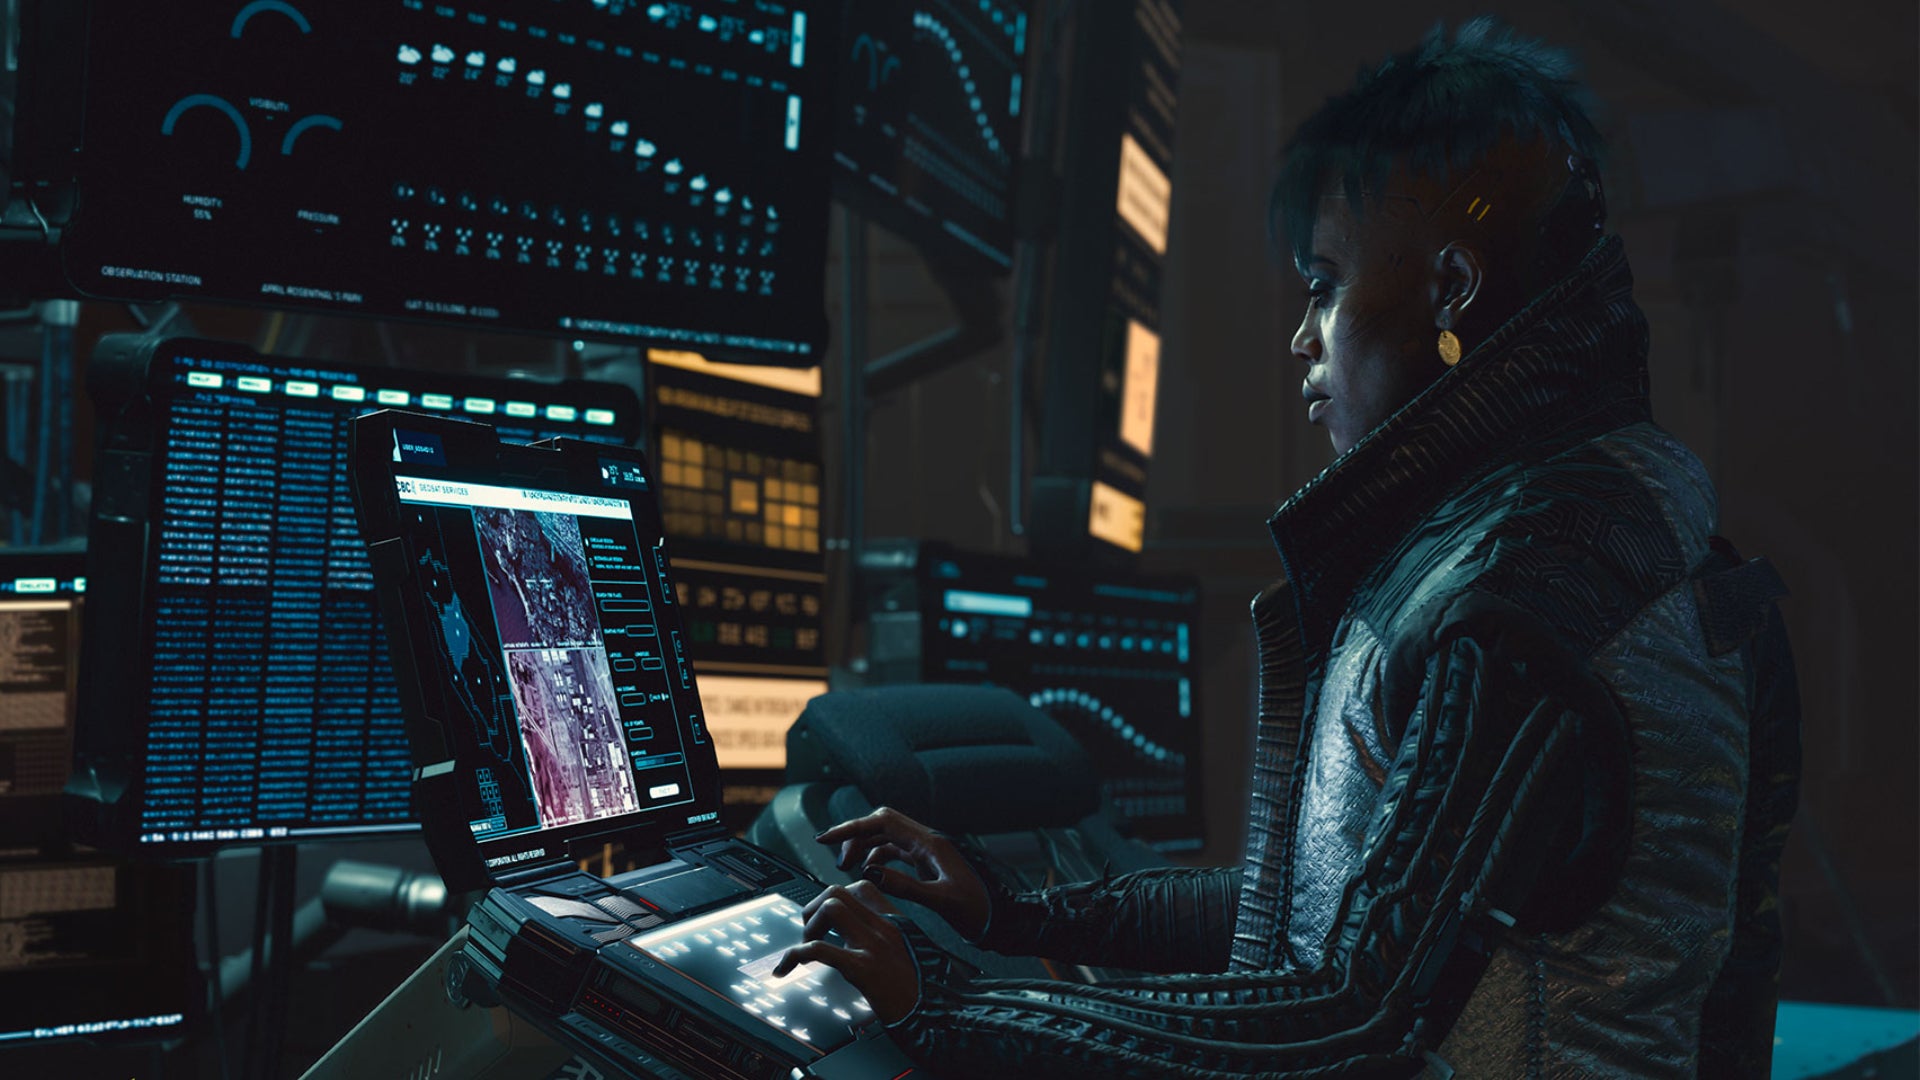 A hacker character sits and works at one of many monitors in Cyberpunk 2077.